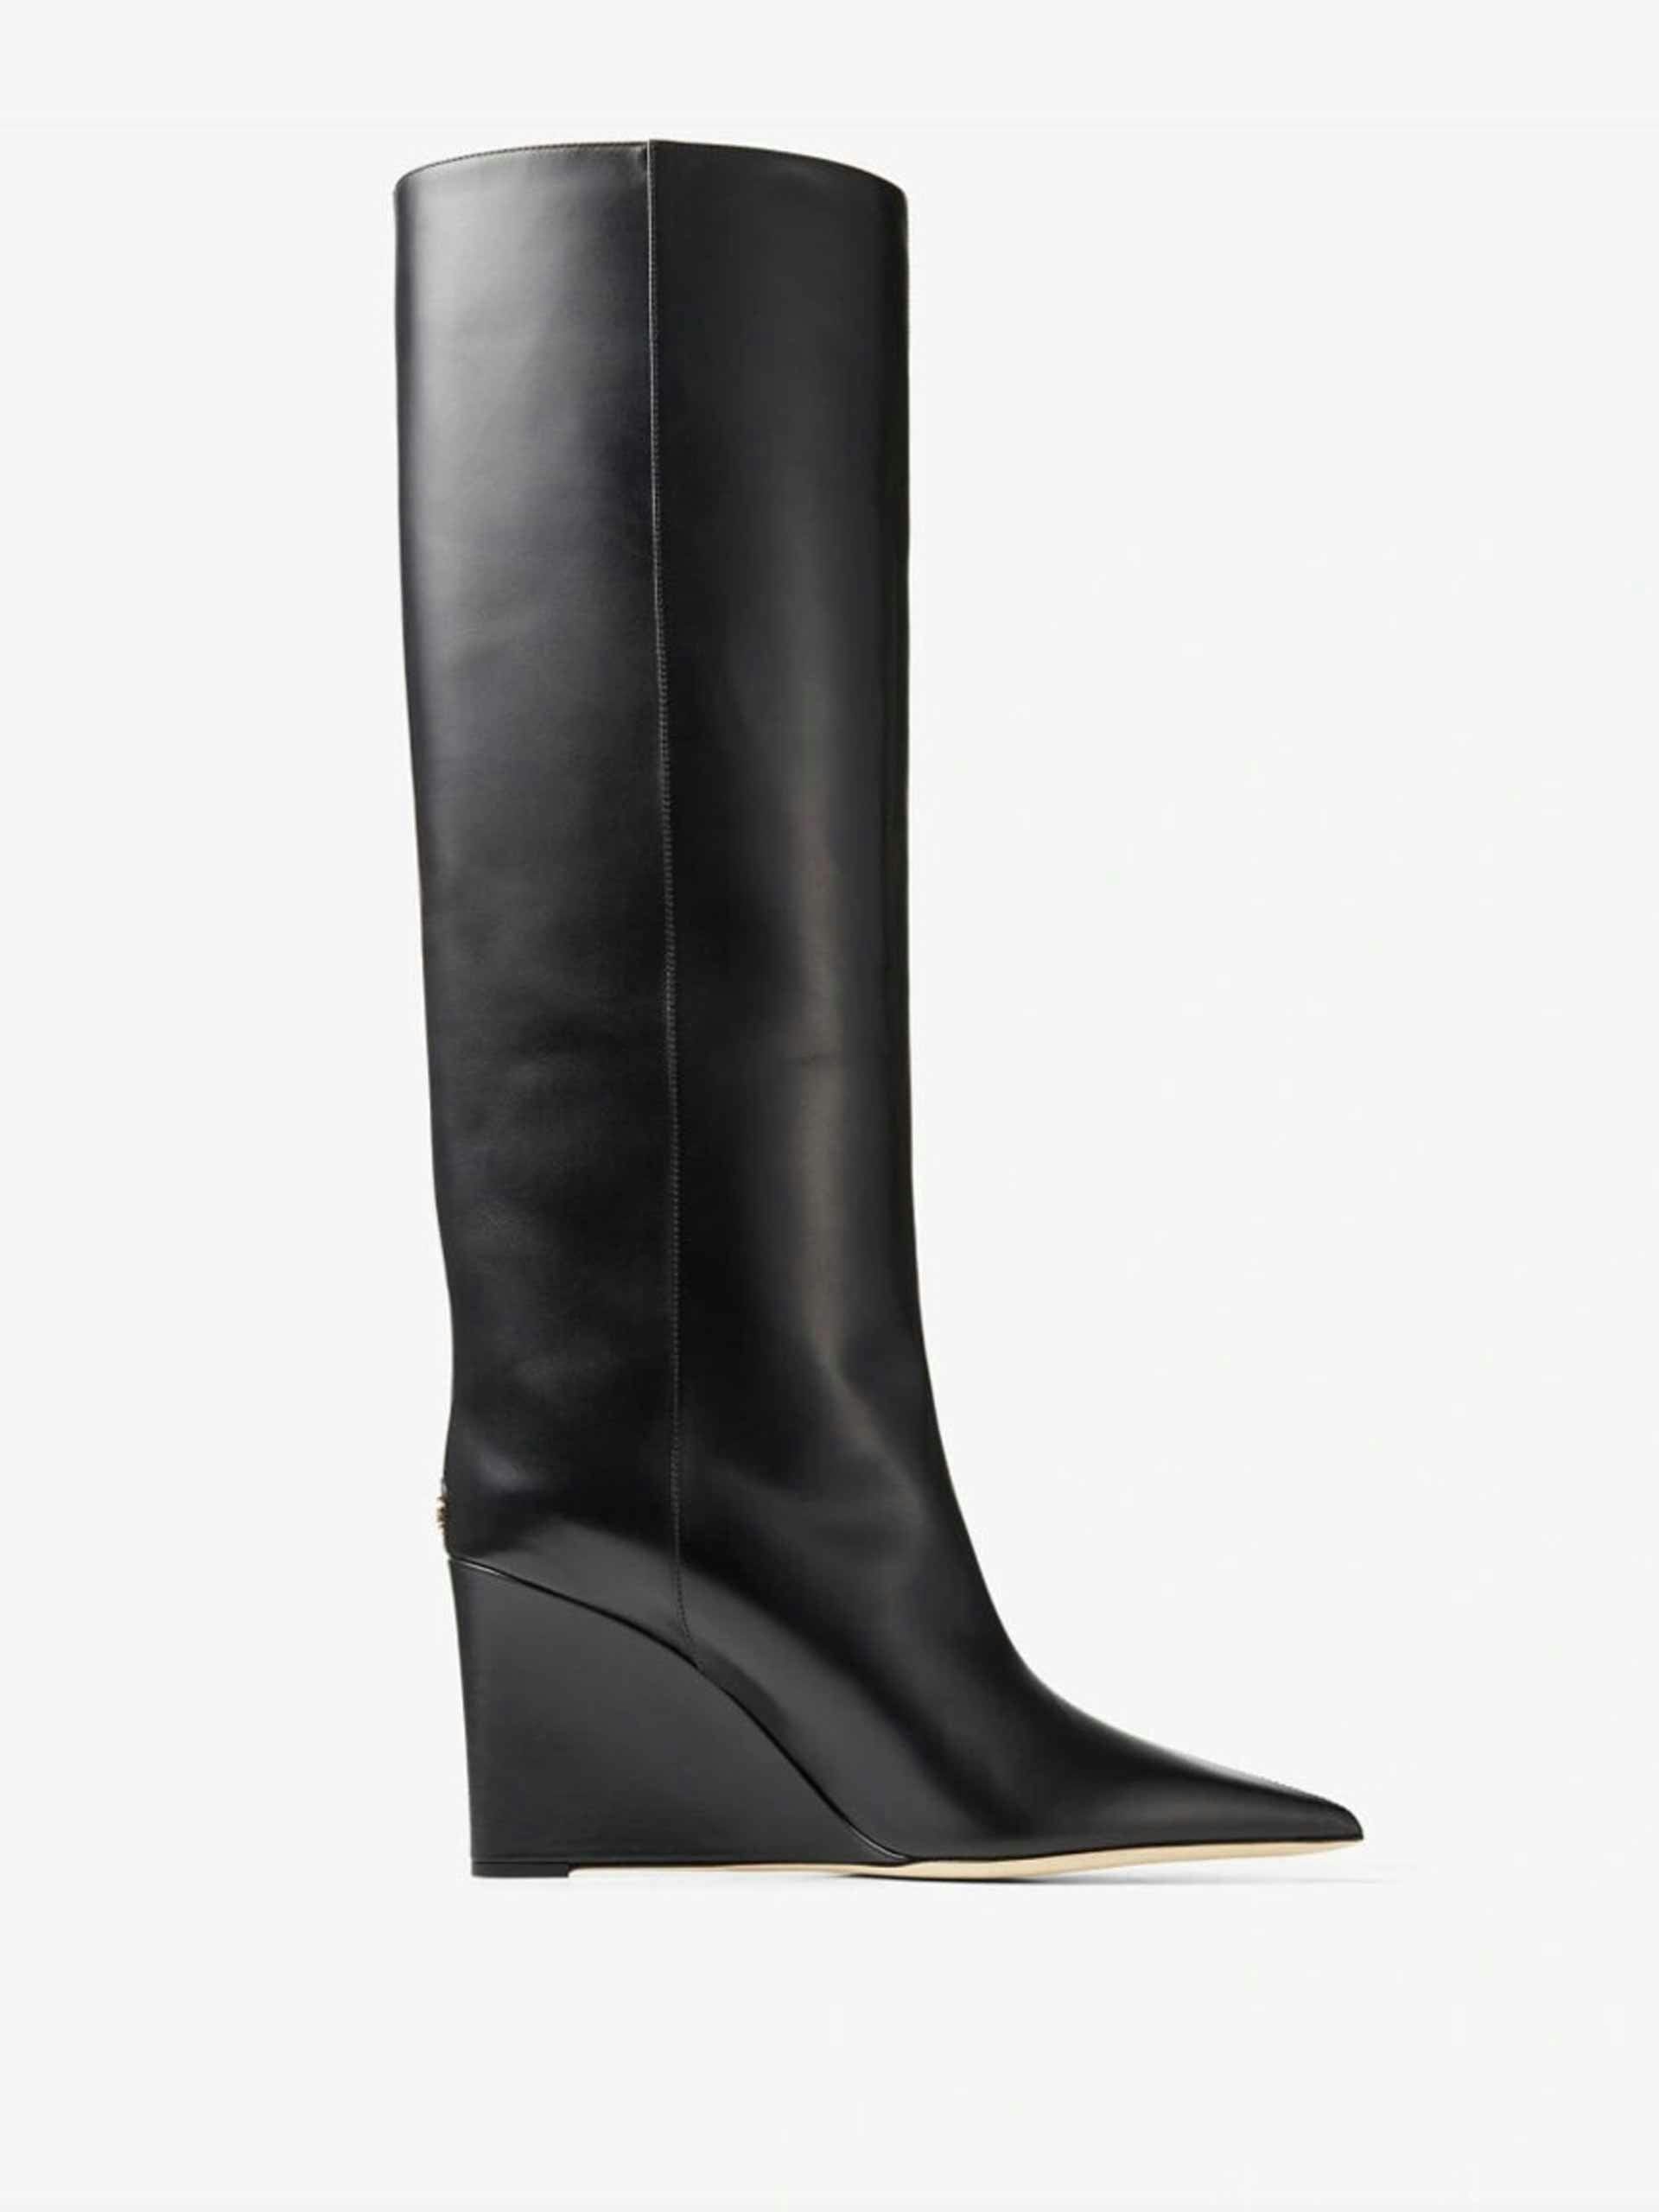 Black calf leather wedge knee-high boots